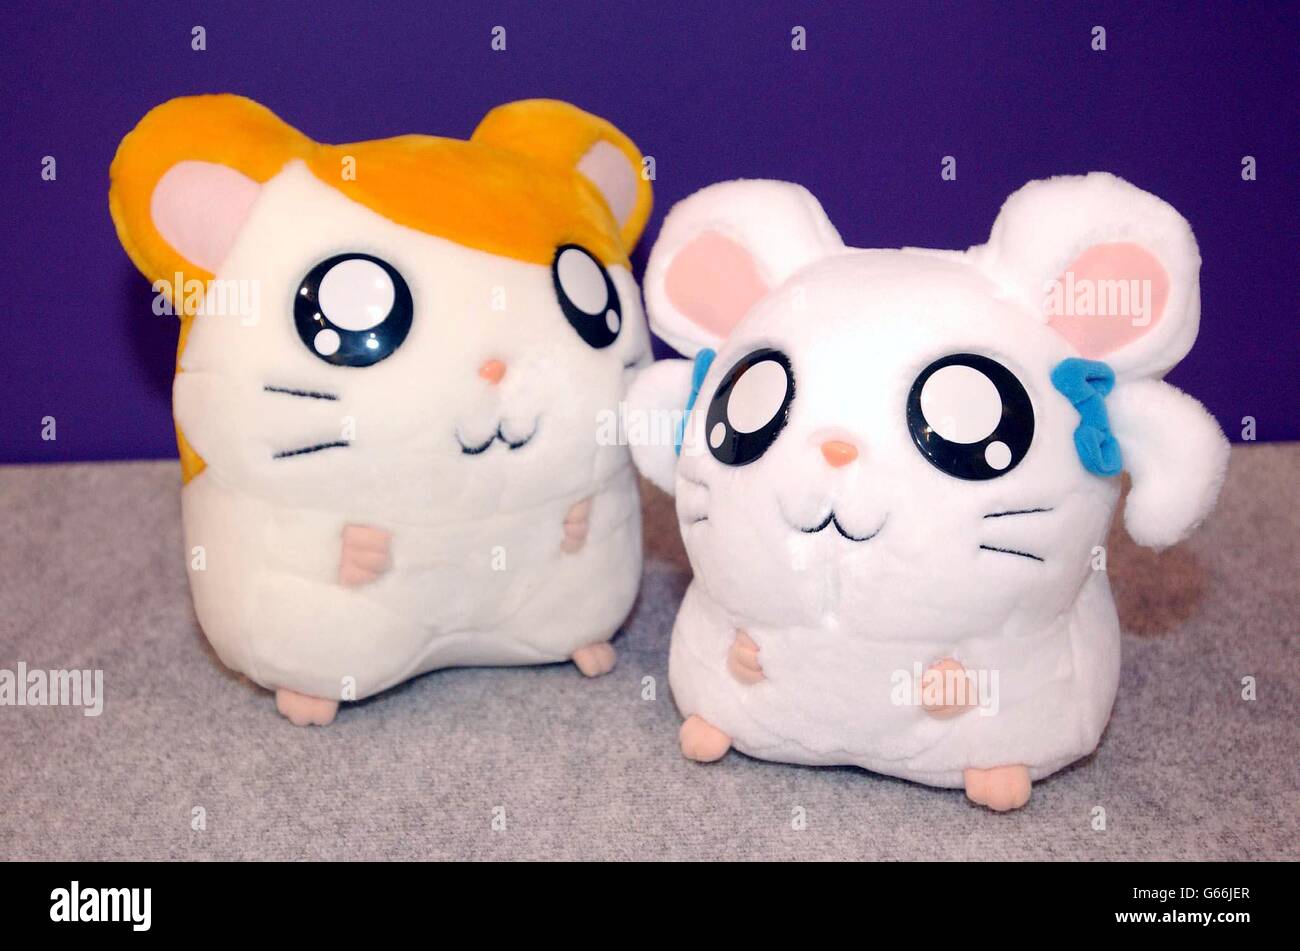 A new toy called Hamtaro on display during the Toy Fair, at the Excel Centre in London's Dockland. Hamtaro, a hamster who gets himself into lots of mischief, is a $2.5 billion property in Japan, and follows the TV animated story of Laura and the adventures she has with her pet hamster. Stock Photo